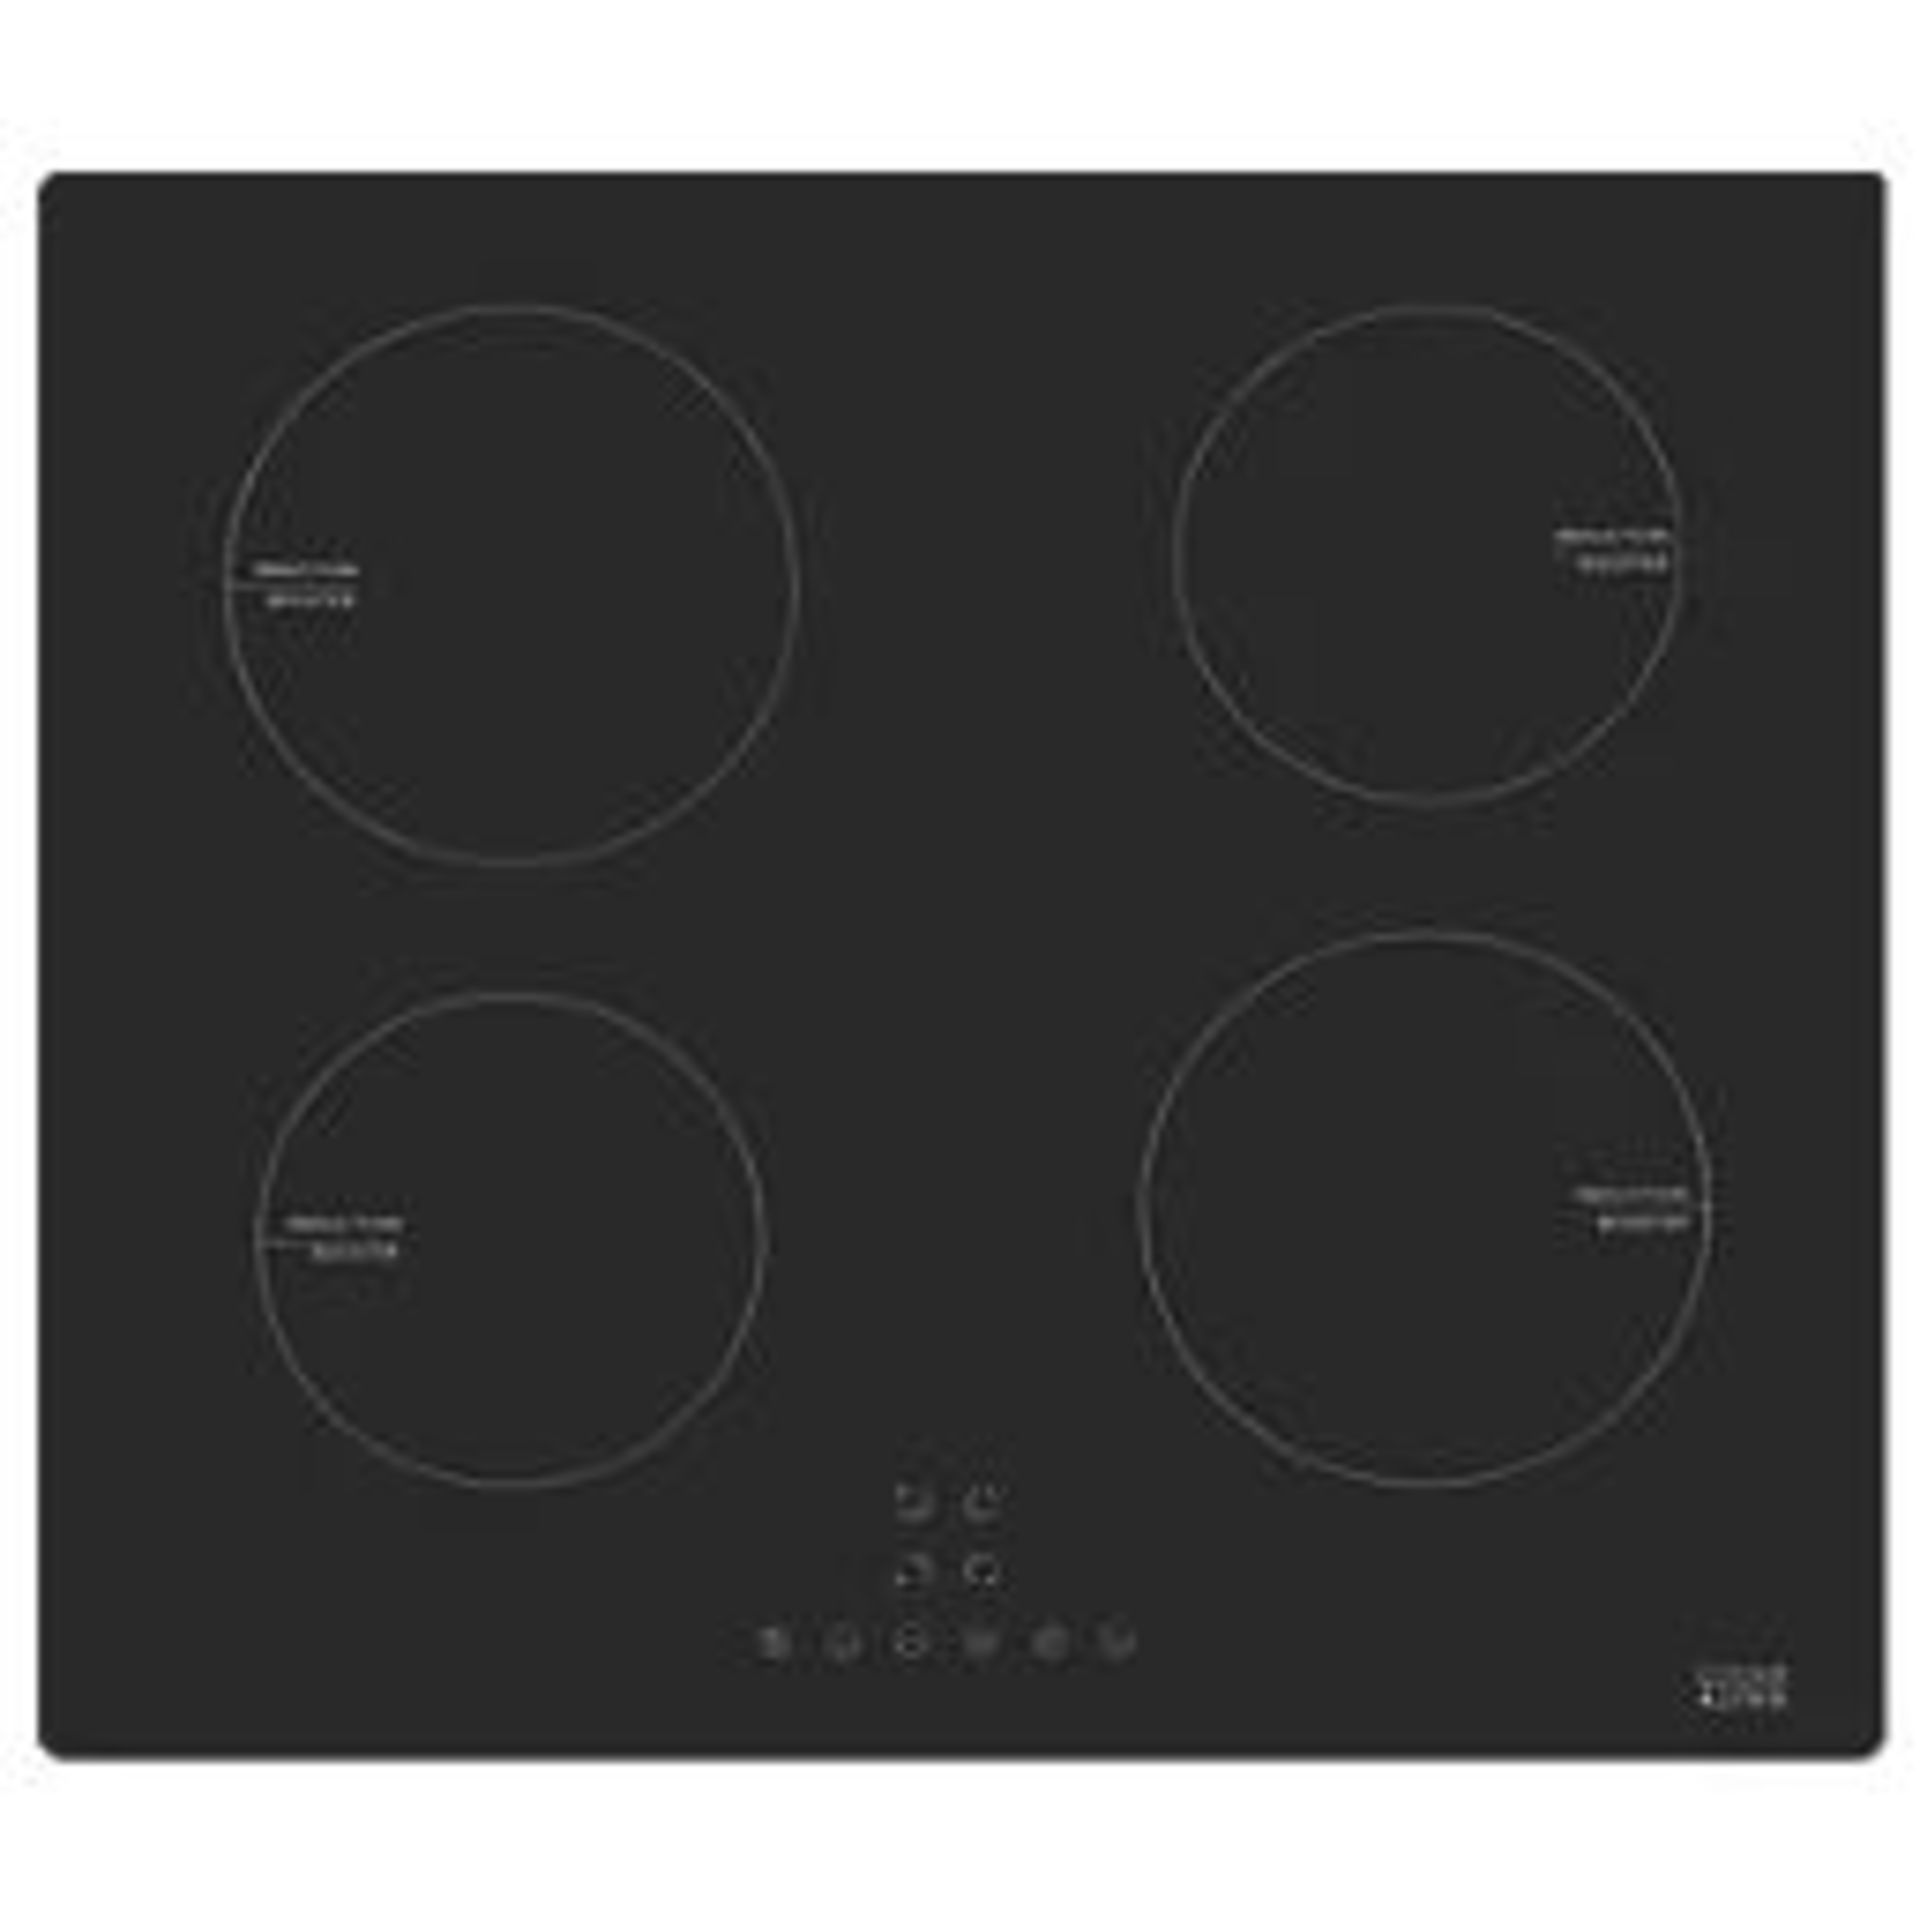 COOKE & LEWIS INDUCTION HOB BLACK 59CM. - R14. Induction hob heats the surface of the pan, not the